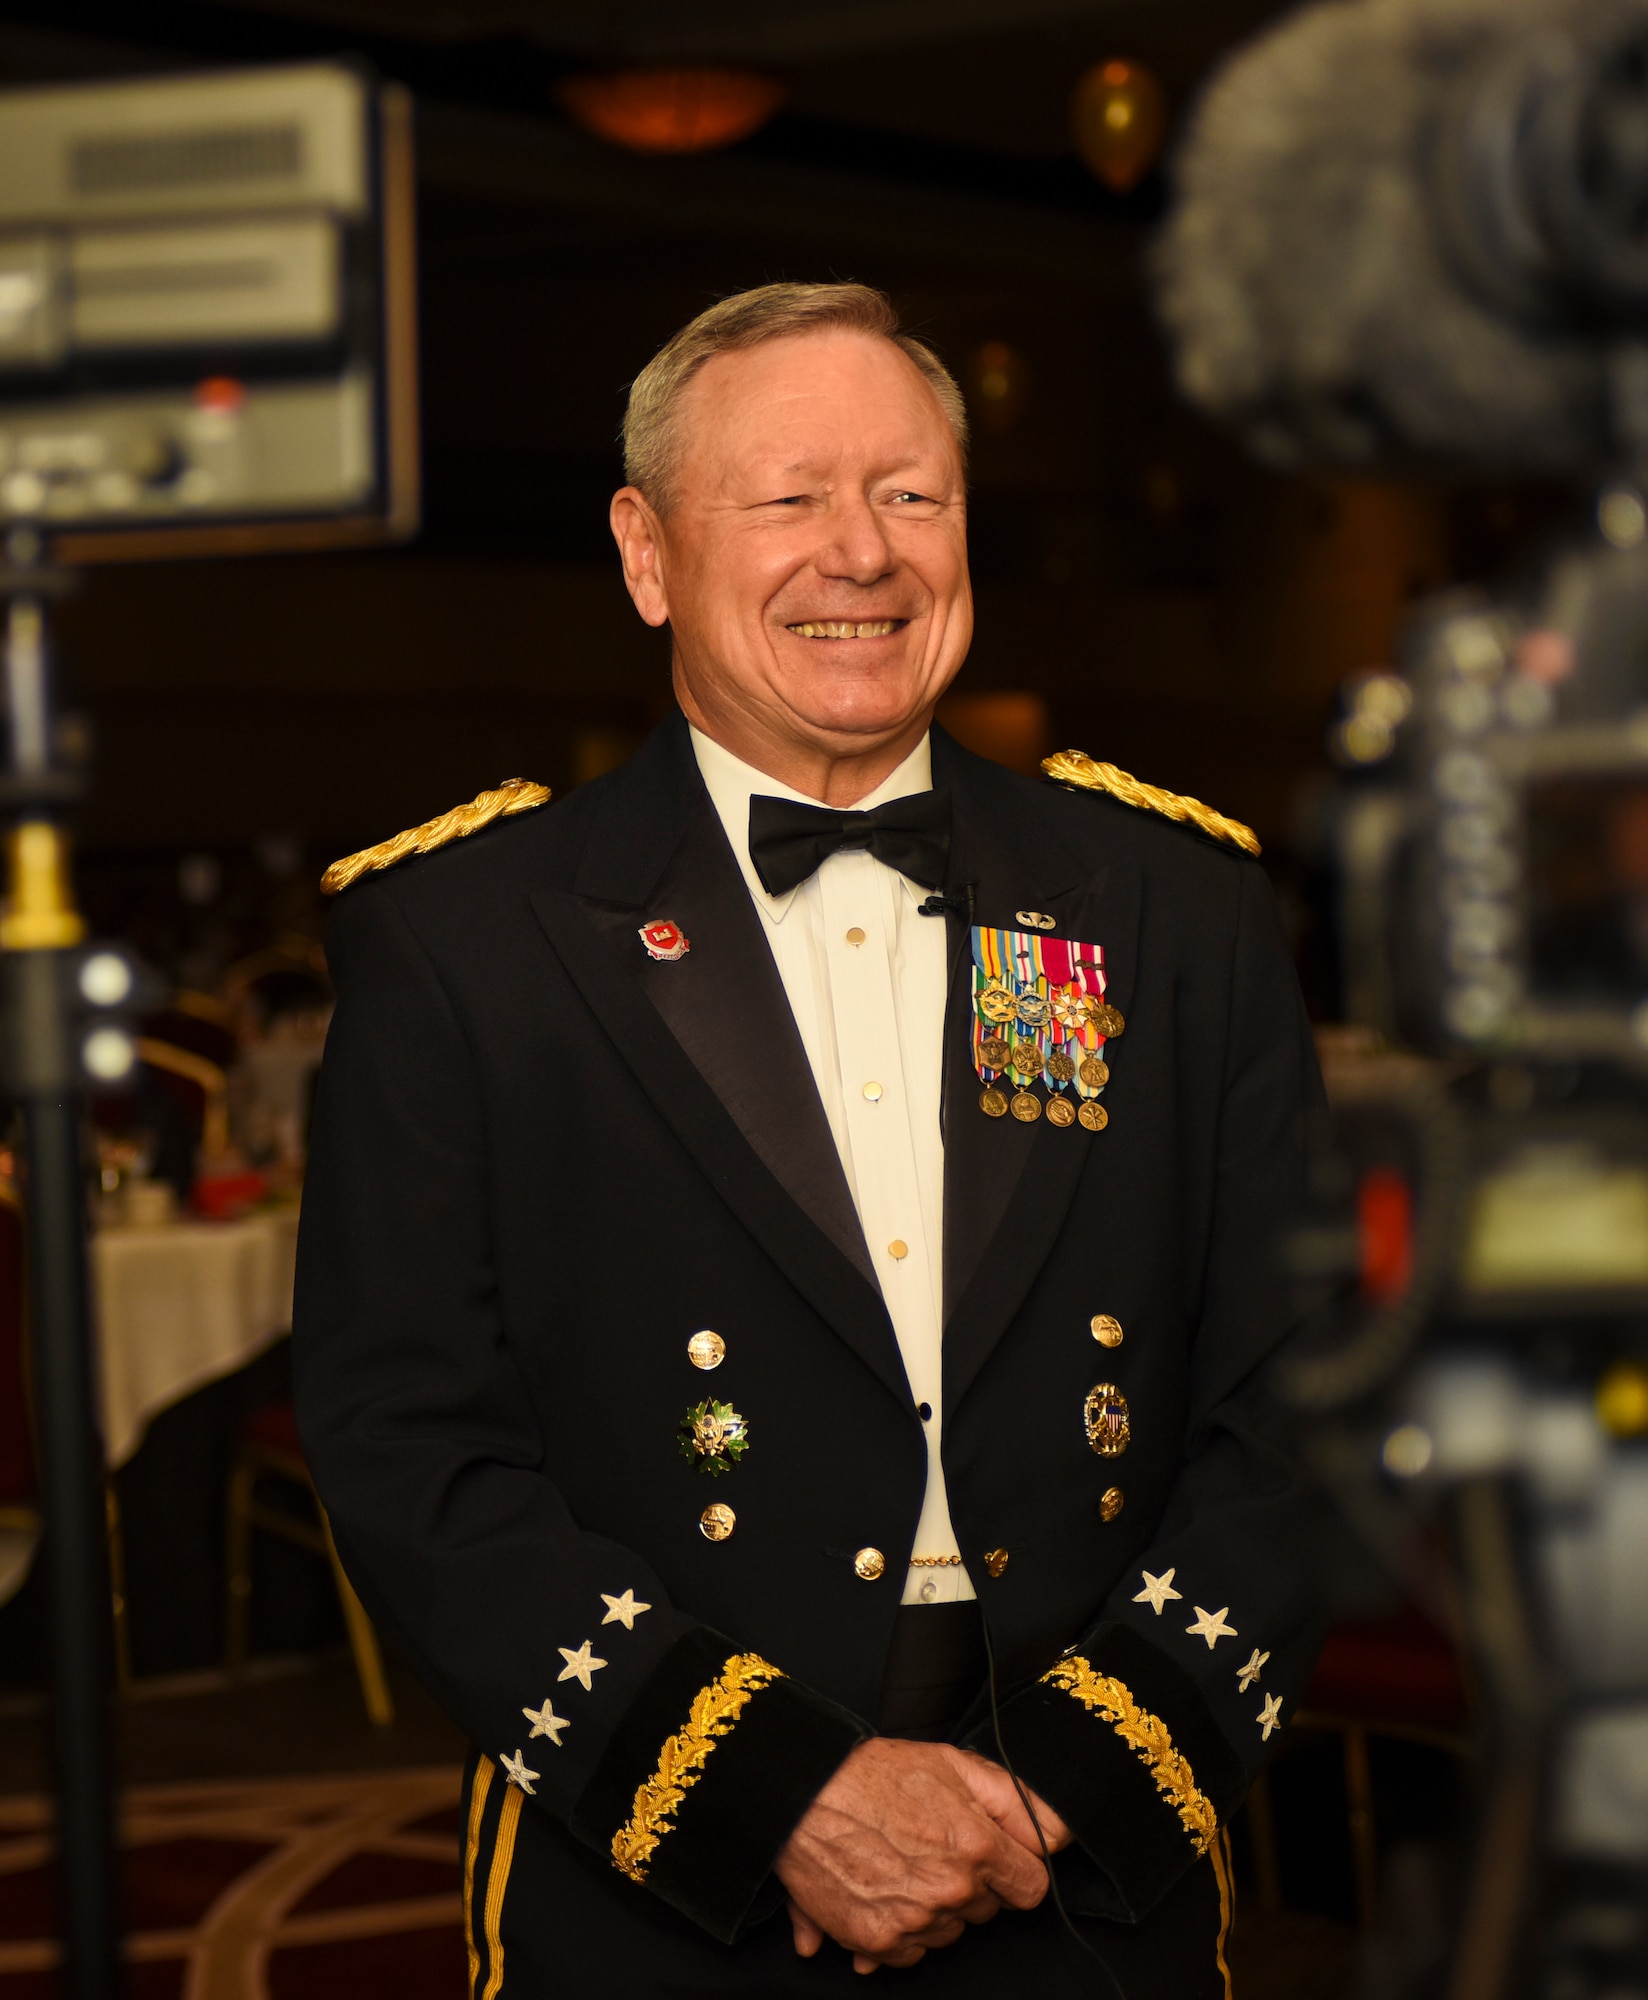 U.S. Army Gen. Frank J. Grass, Chief of the National Guard Bureau, gives an interview prior to the Ohio National Guard Association and Ohio National Guard Enlisted Association Spring Dinner Dance, Columbus, Ohio, April 25, 2015. Gen. Grass was the guest speaker at the event which is held annually for association members in both the Air and Army National Guard. (U.S. National Guard photo by Senior Airman Wendy Kuhn/Released)